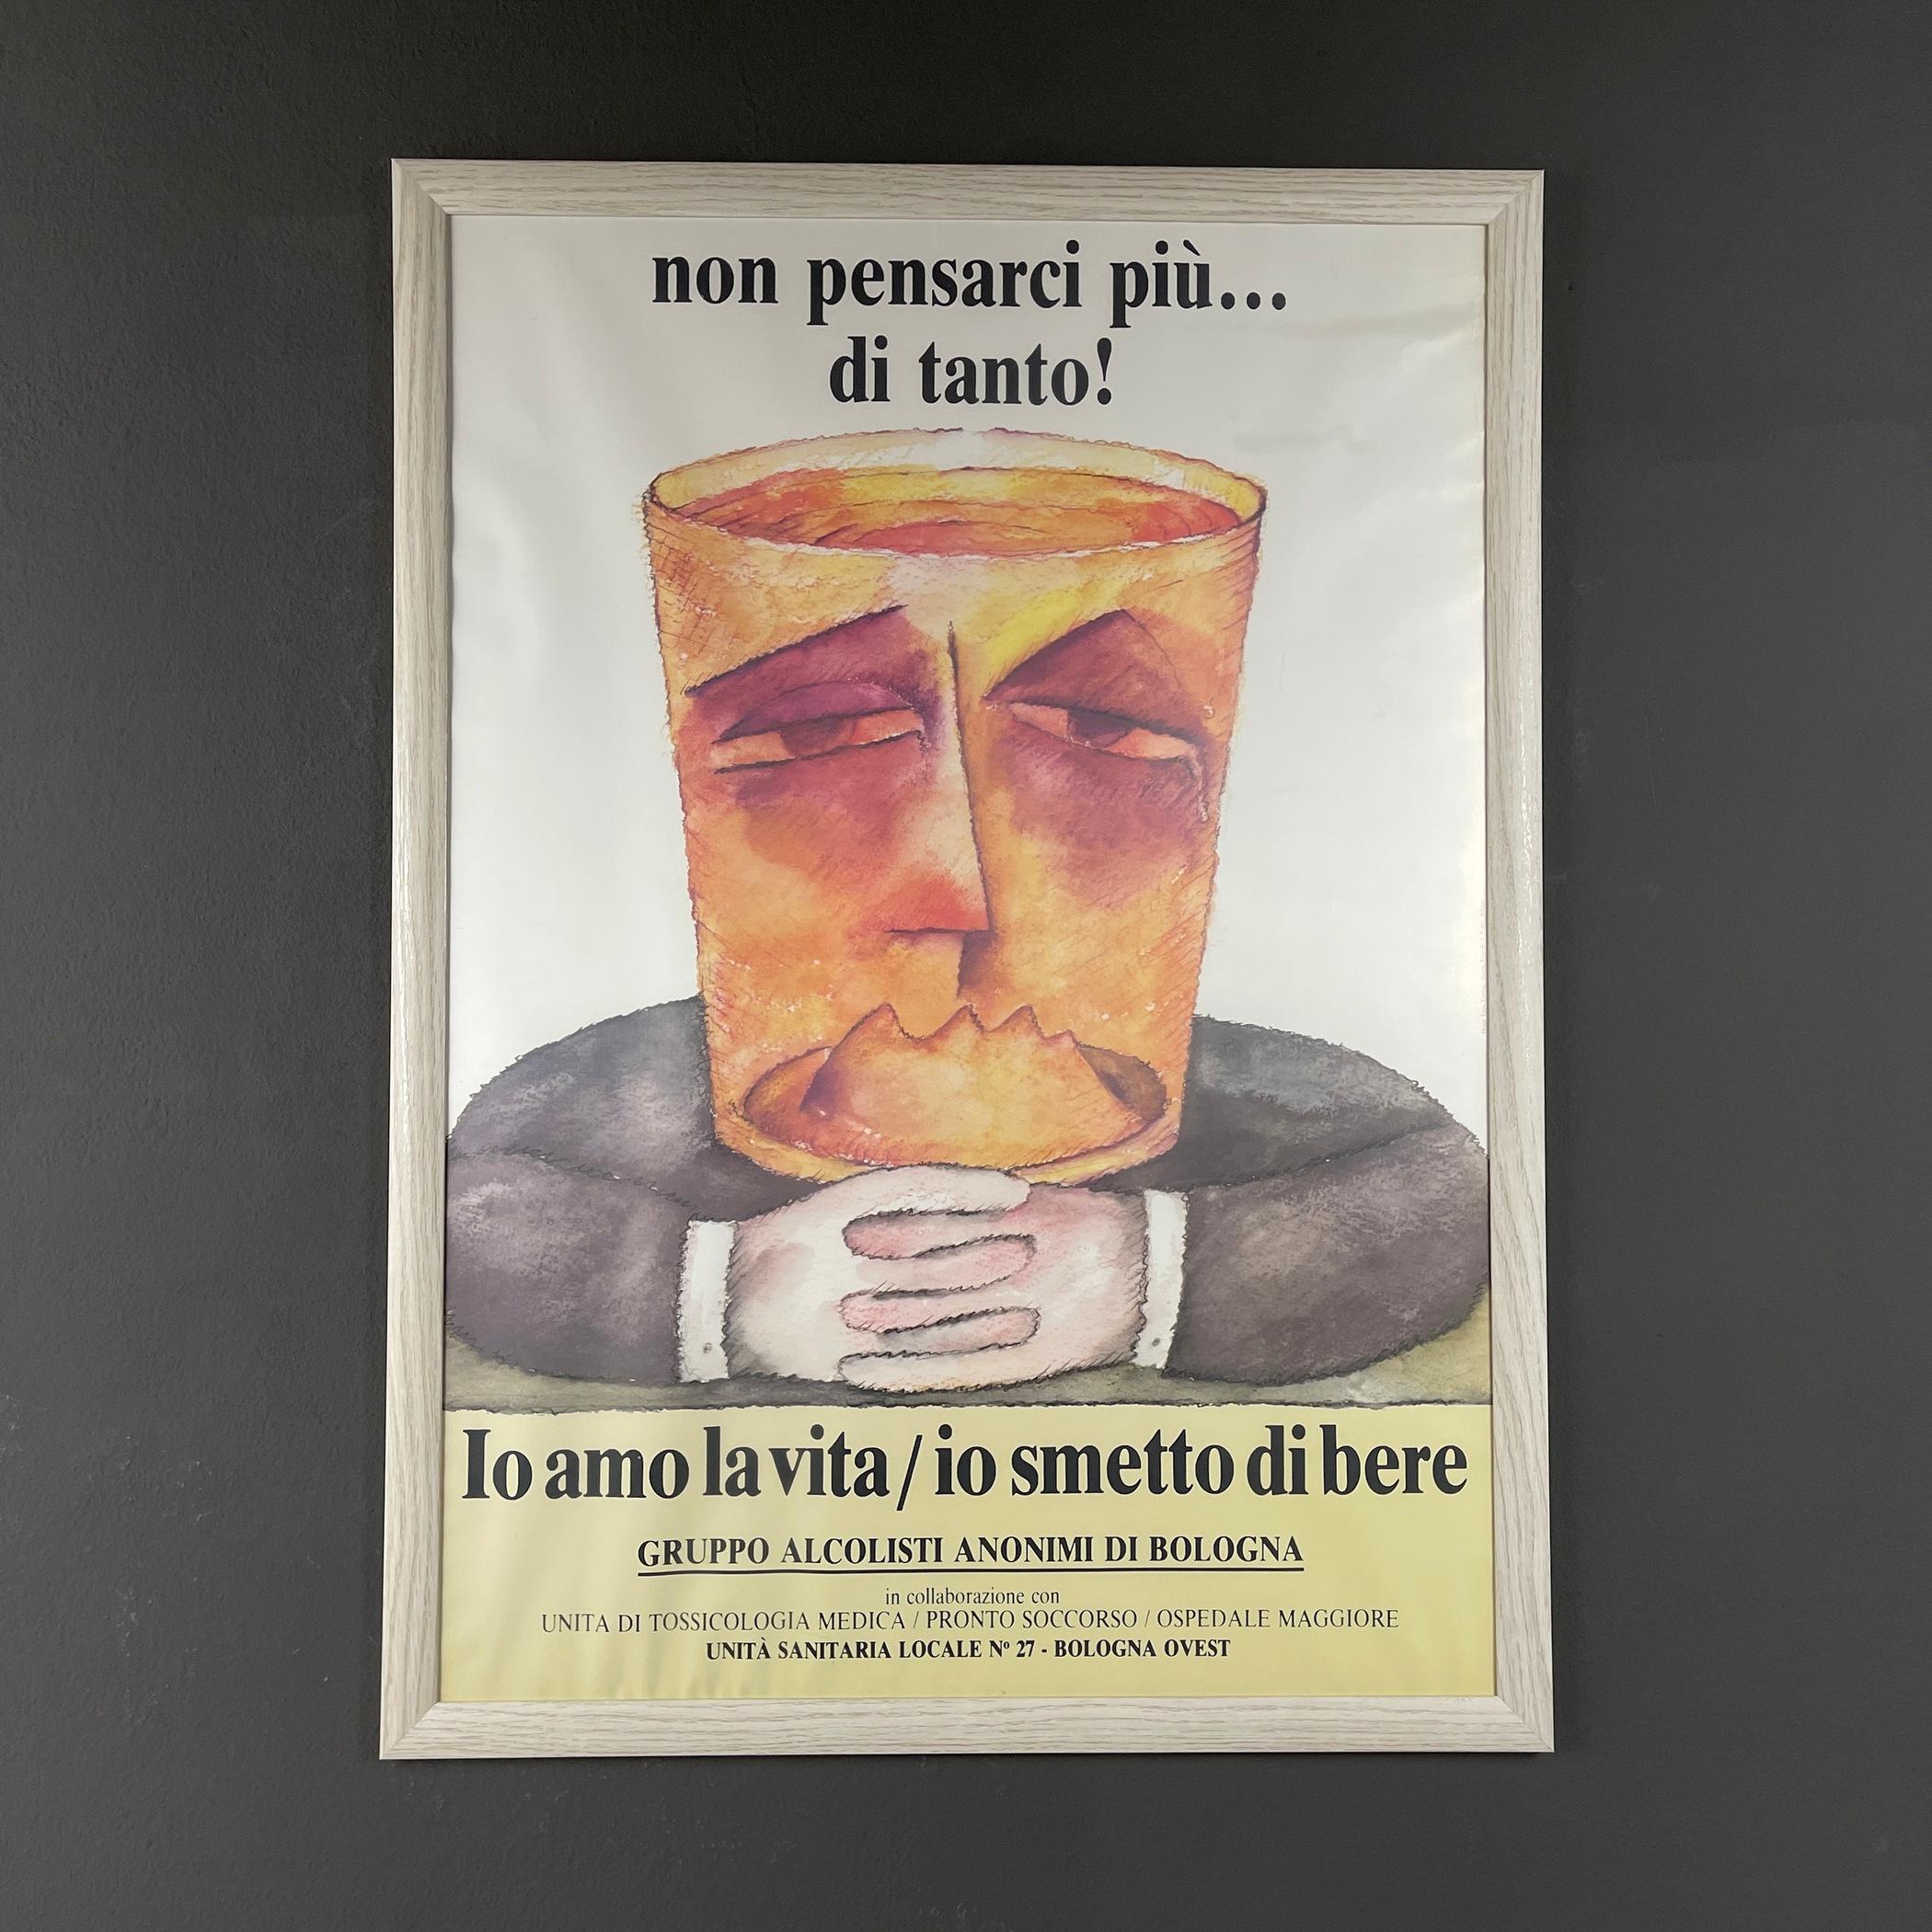 Four original posters from Alcoholics Anonymous. Printed in Italy at city of Bologna at 80s of the last century. Design by famous graphic designer Ennio Tamburi. Great vintage condition, paper is clear and not ripped! Sizes are 50x70 cm. Each poster